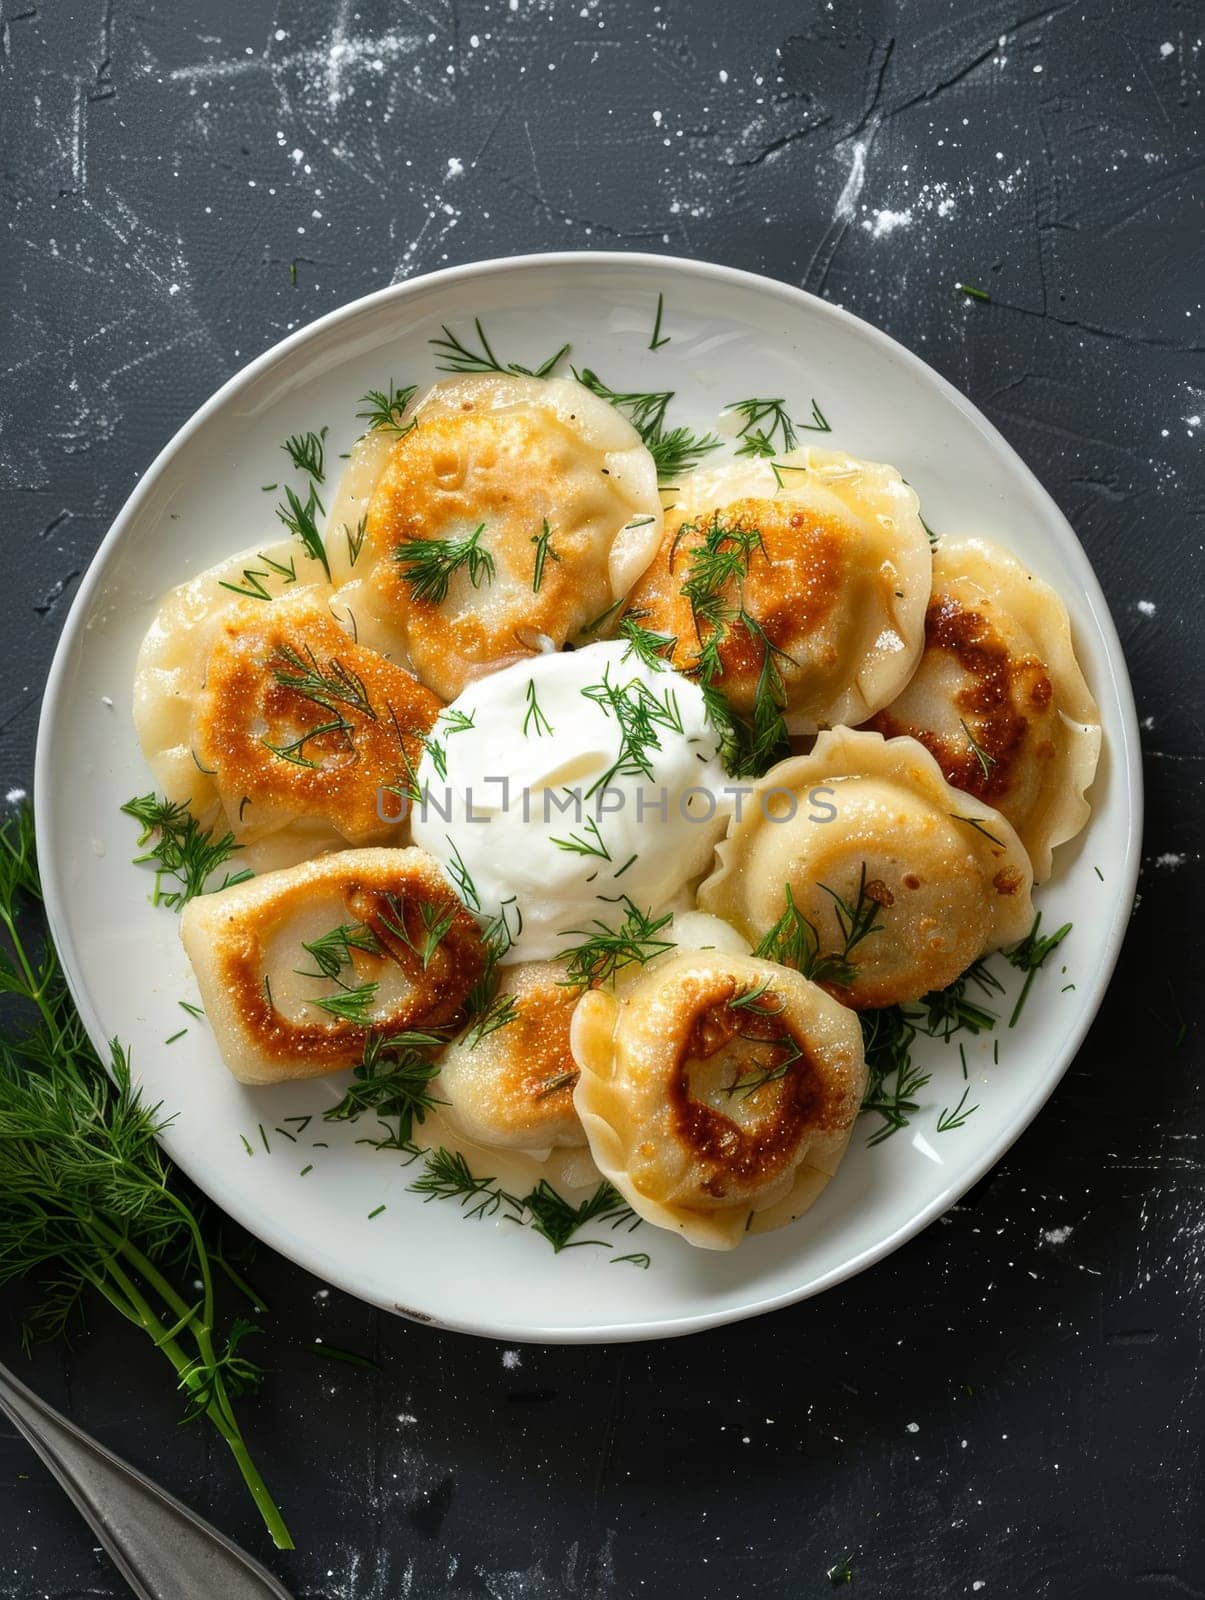 Authentic Polish pierogi, traditional dumplings served on a white plate with a dollop of sour cream and fresh dill - a comforting and delicious representation of Eastern European comfort food. by sfinks